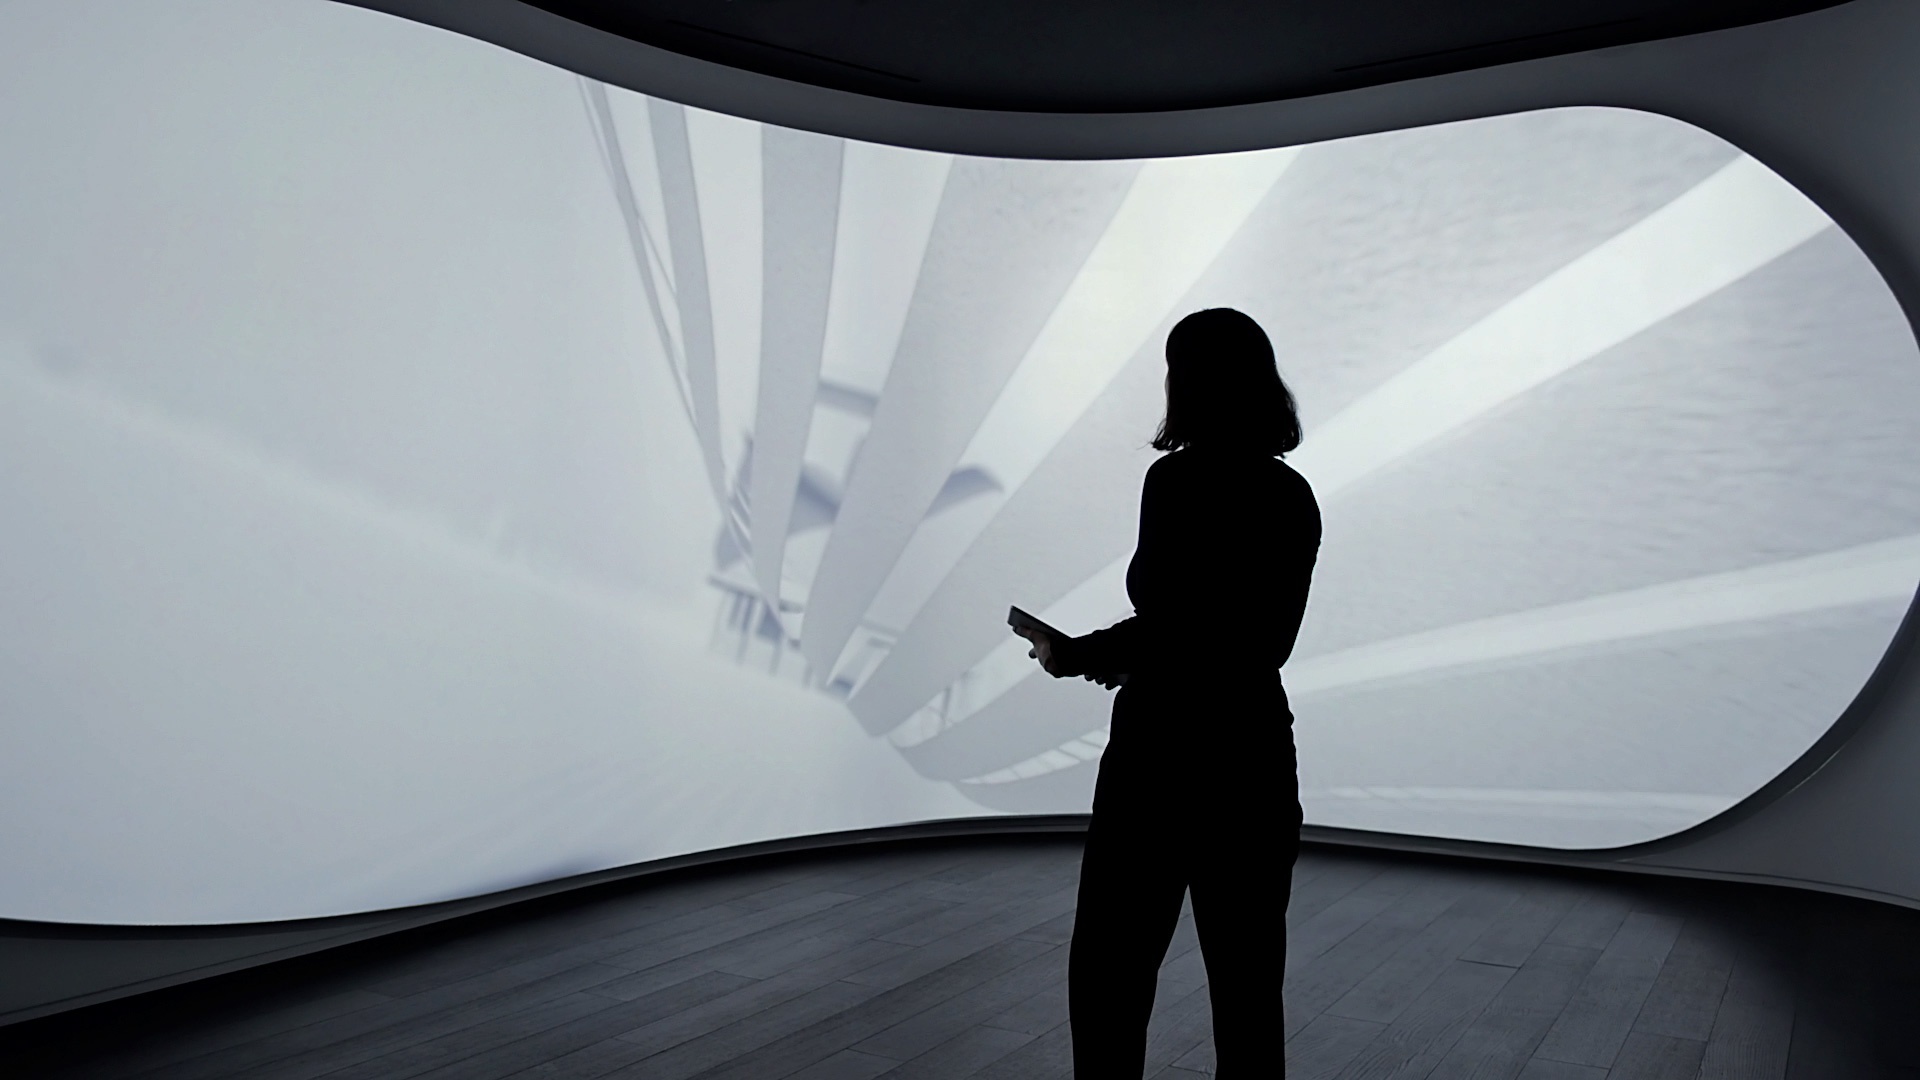 Woman holding a mobile device standing in front of a curved screen that displays architectural and graphic animations